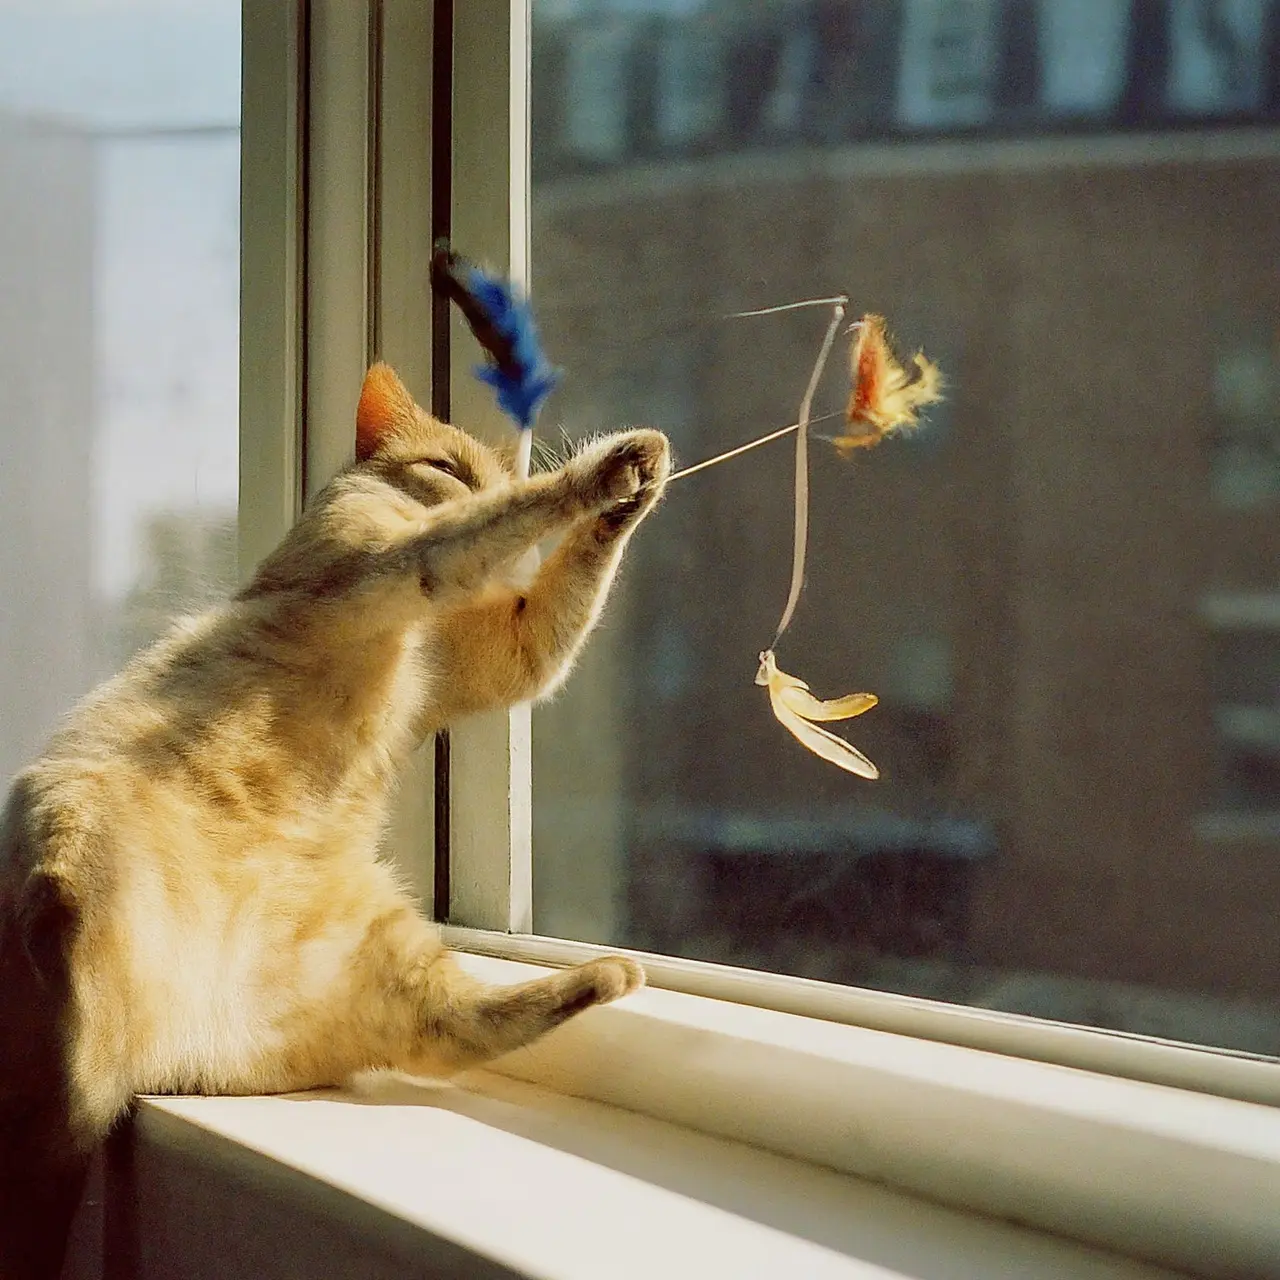 A cat chasing a feather toy on a sunny window ledge. 35mm stock photo